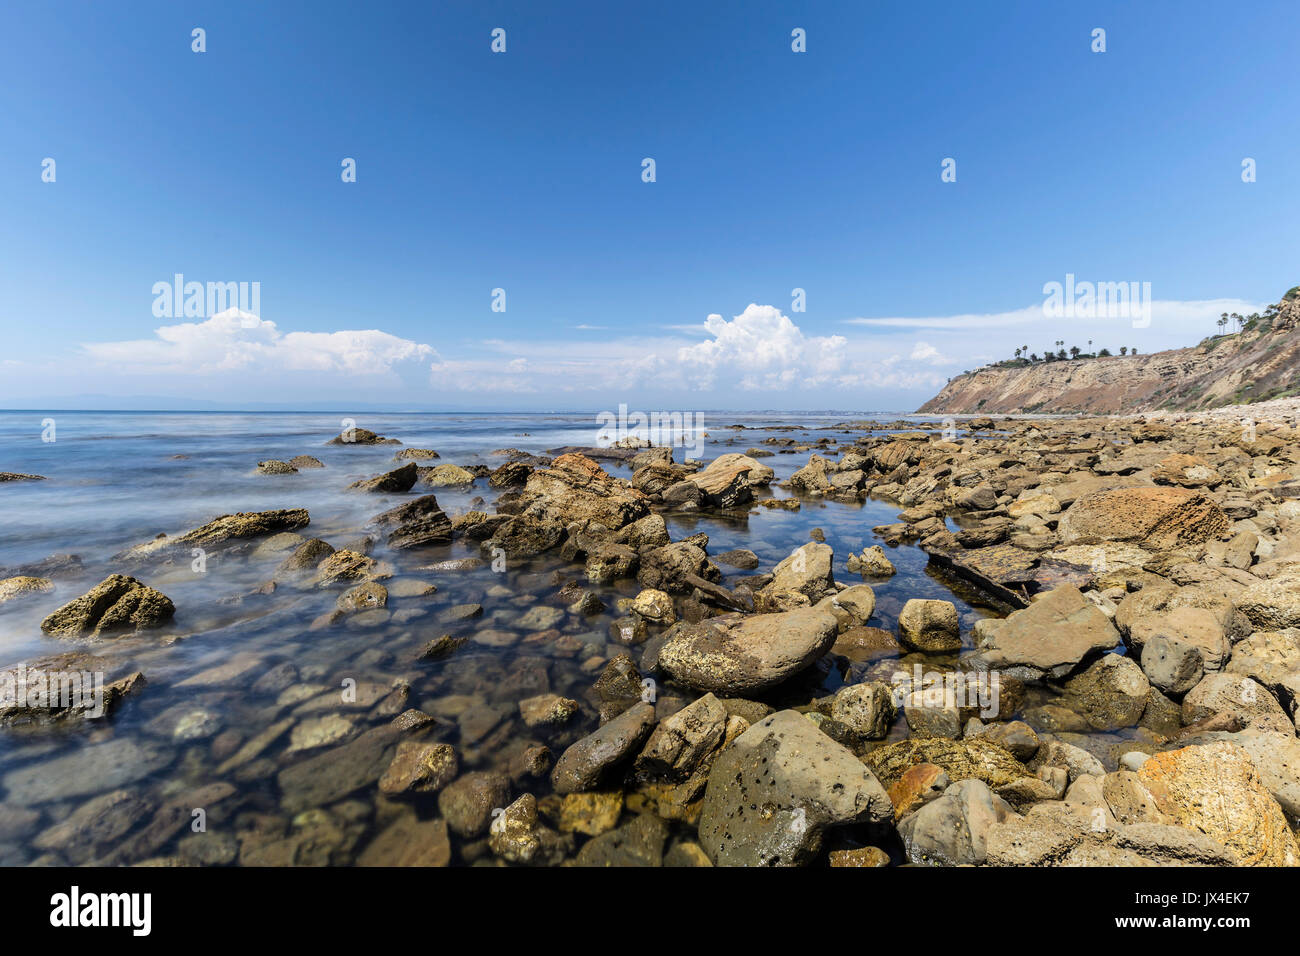 Tidal pools with motion blur water near Rancho Palos Verdes in Los Angeles County, California. Stock Photo